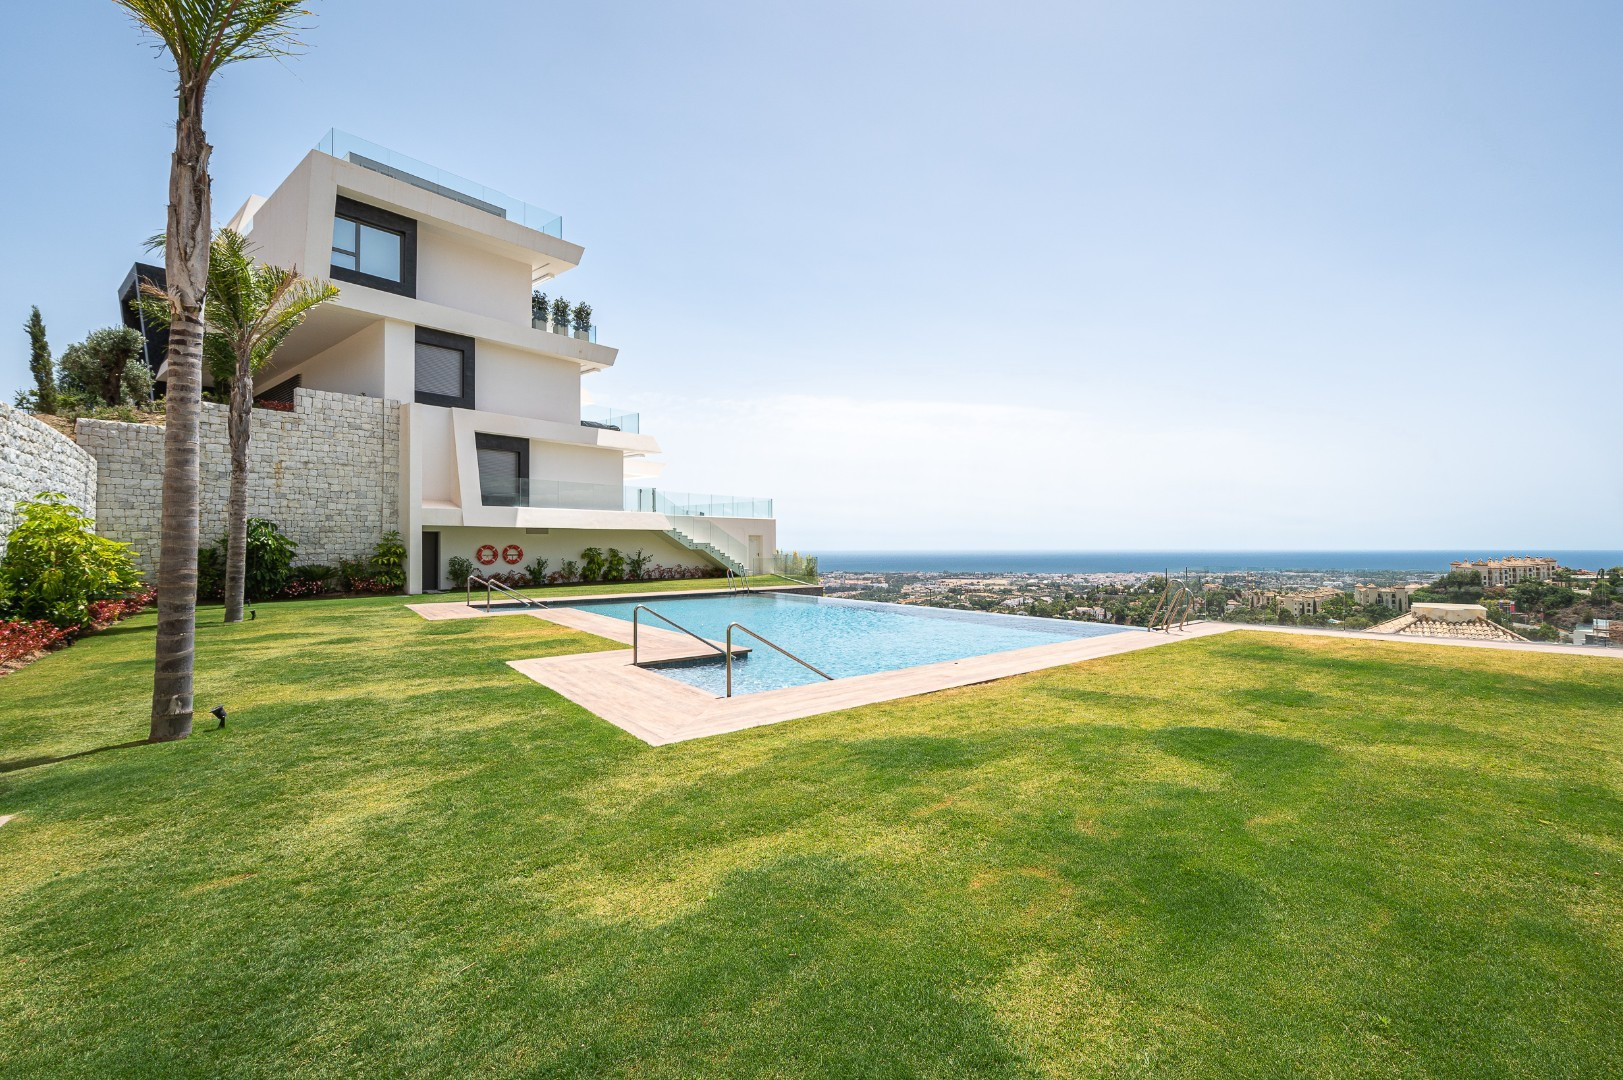 Stunning apartment with panoramic views located within four golf courses